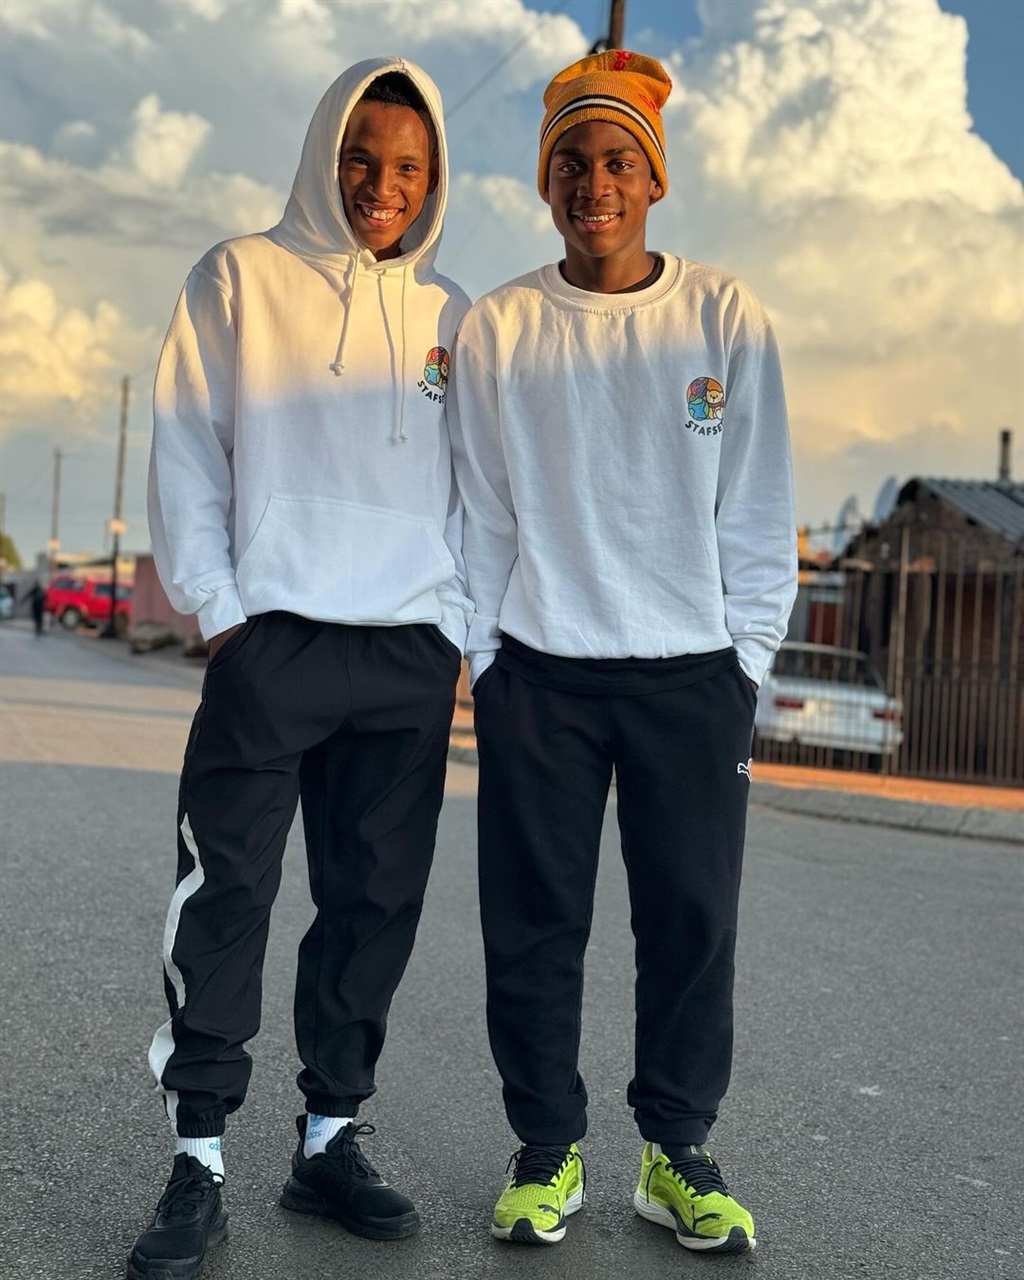 Orlando Pirates and Kaizer Chiefs youngsters Relebohile Mofokeng and Mfundo Vilakazi appear to be one of the leading ambassadors of local apparel brand STAFSETU.